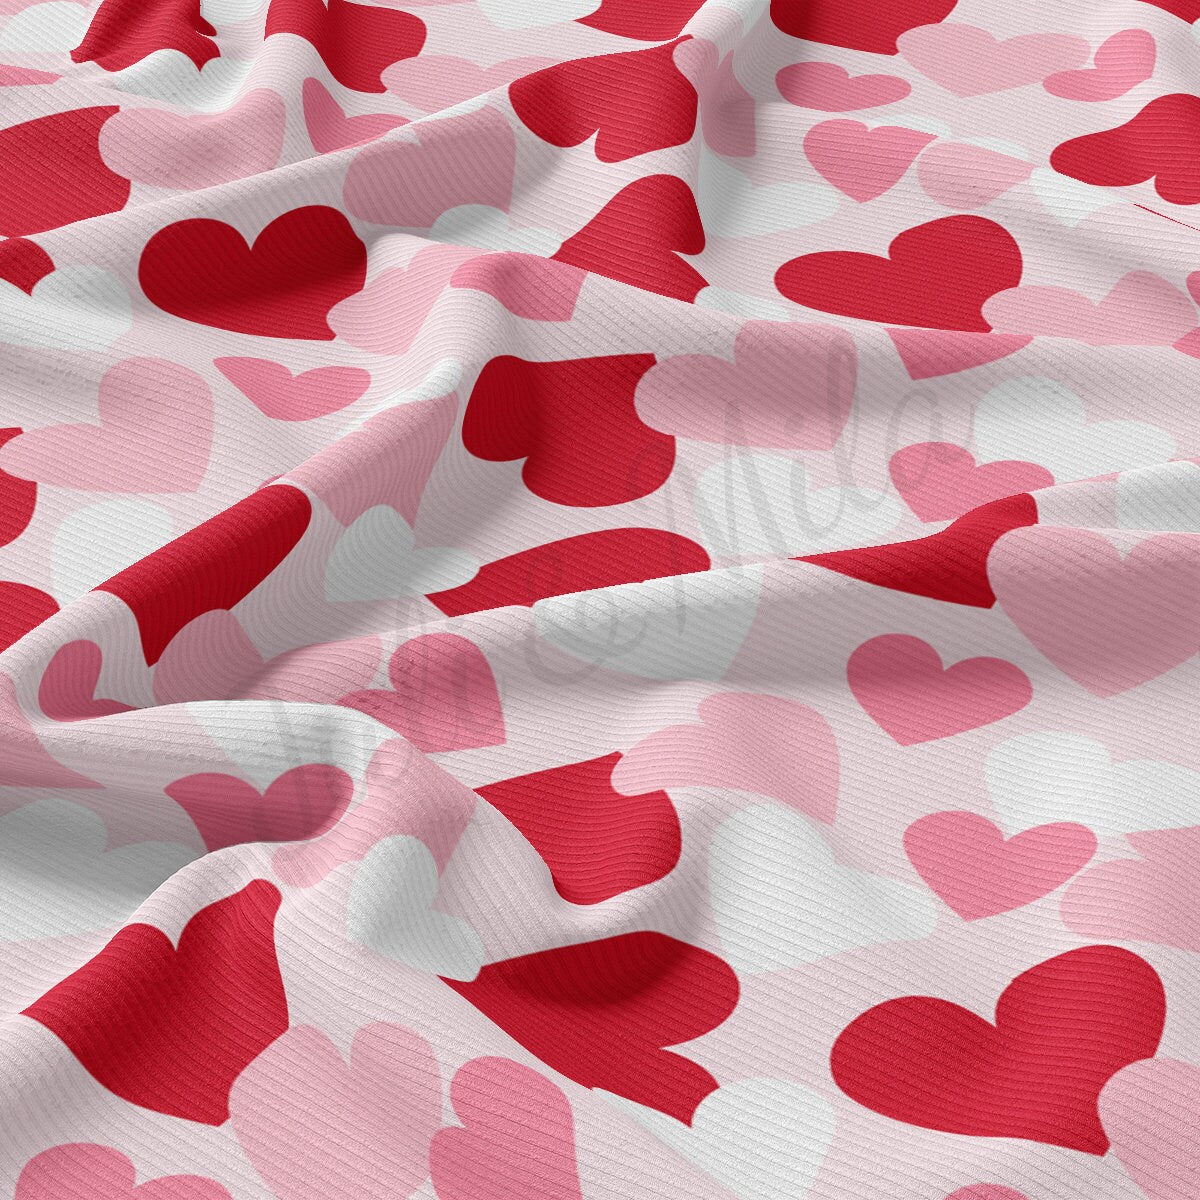 Rib Knit Fabric by the Yard Ribbed Jersey Stretchy Soft Polyester Stretch  Fabric 1 Yard RBK2278 Valentine's Day